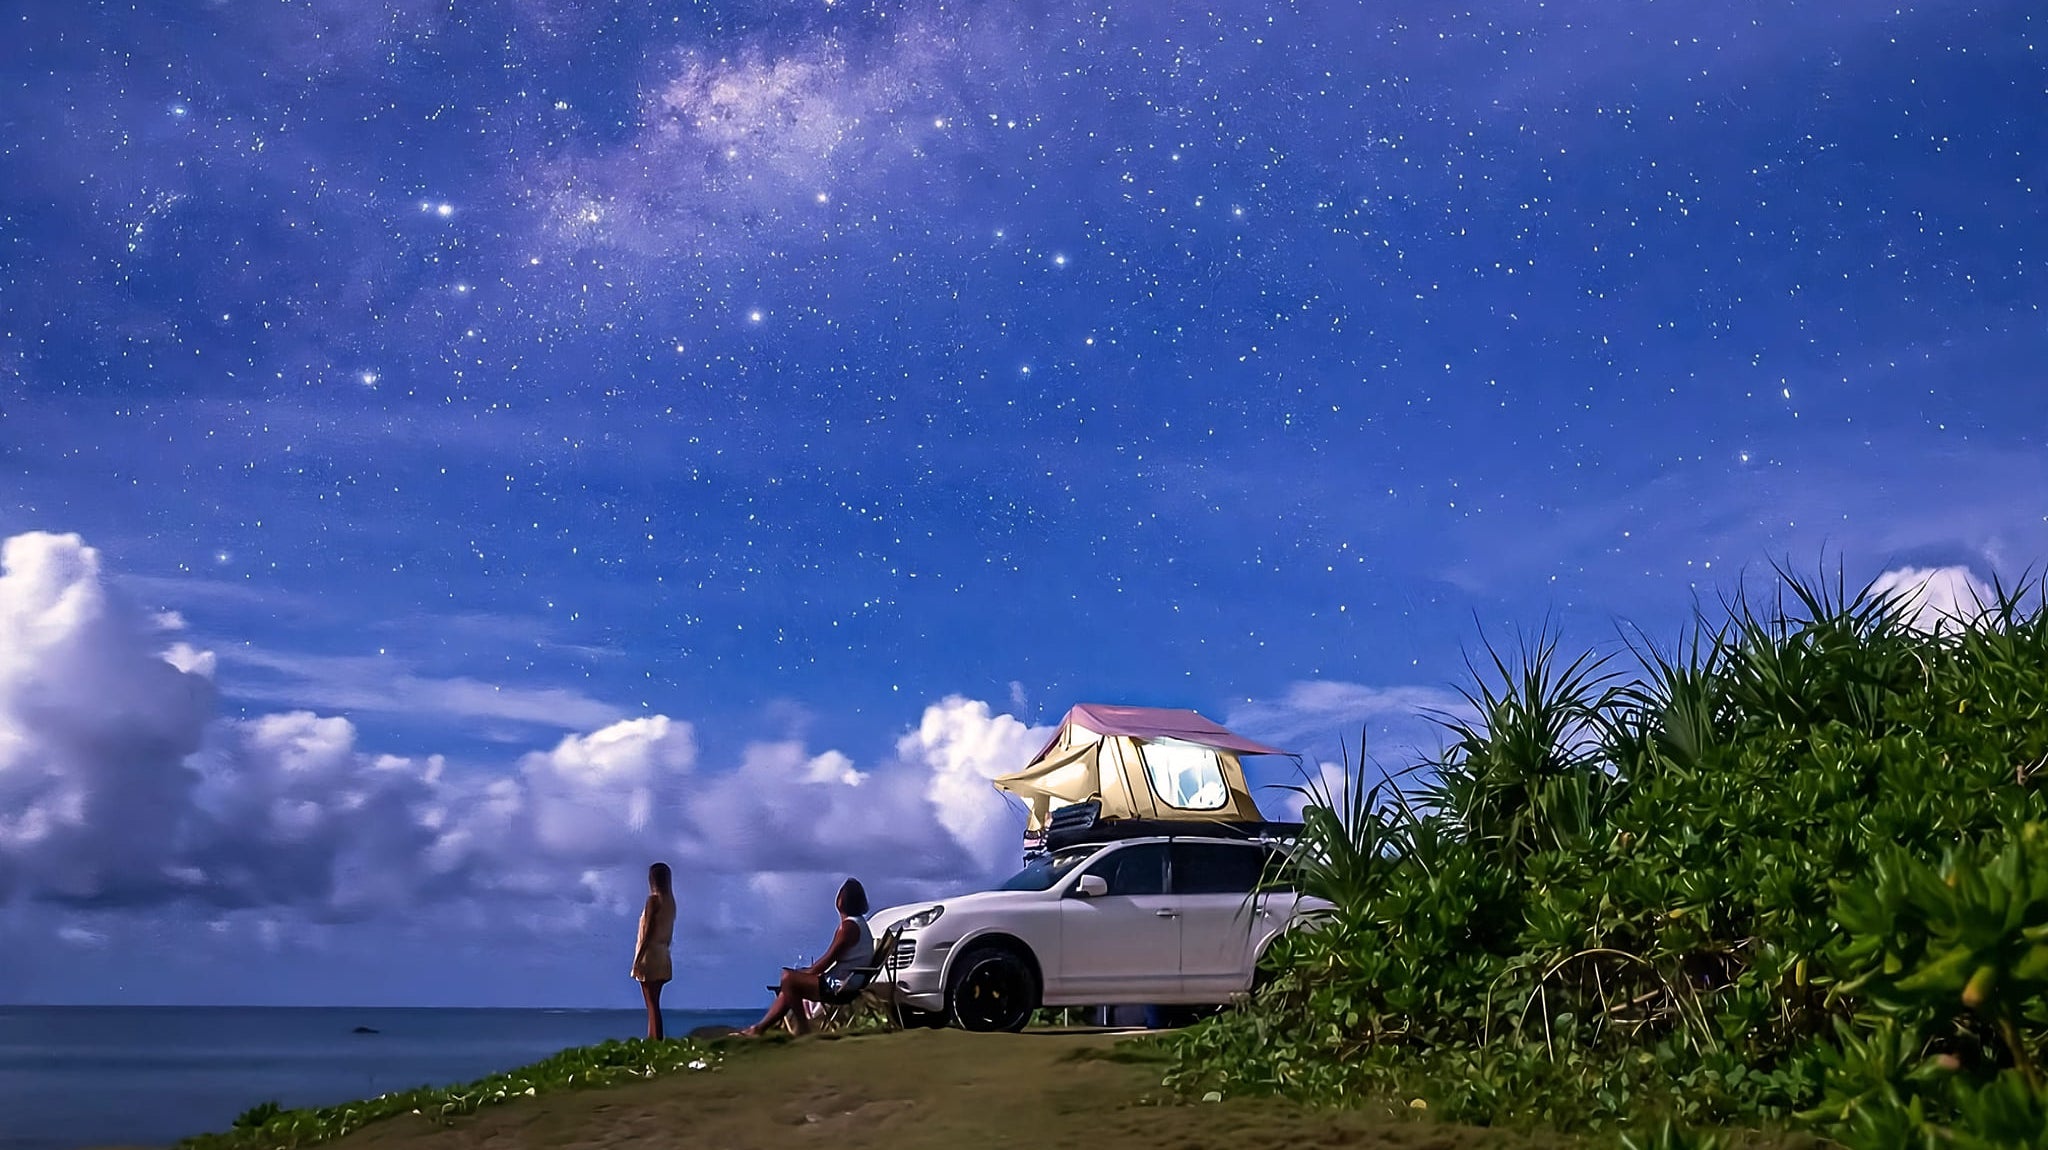 Sleep Comfortably Camping in Summer with a Rooftop Tent